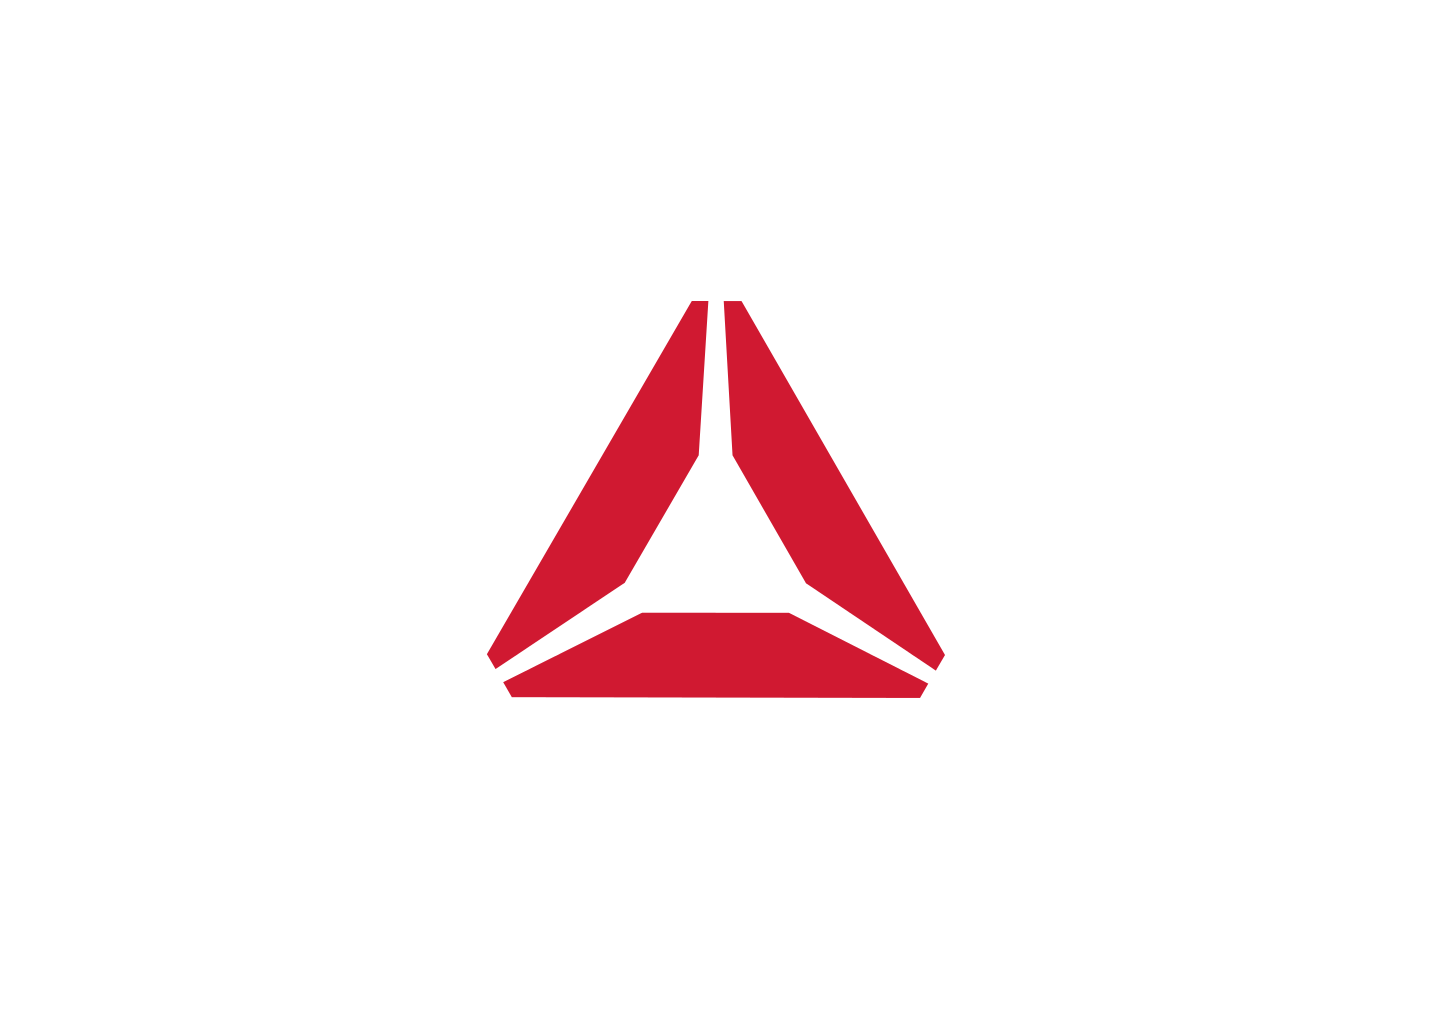 Red Triangular Logo - Red and white triangle Logos